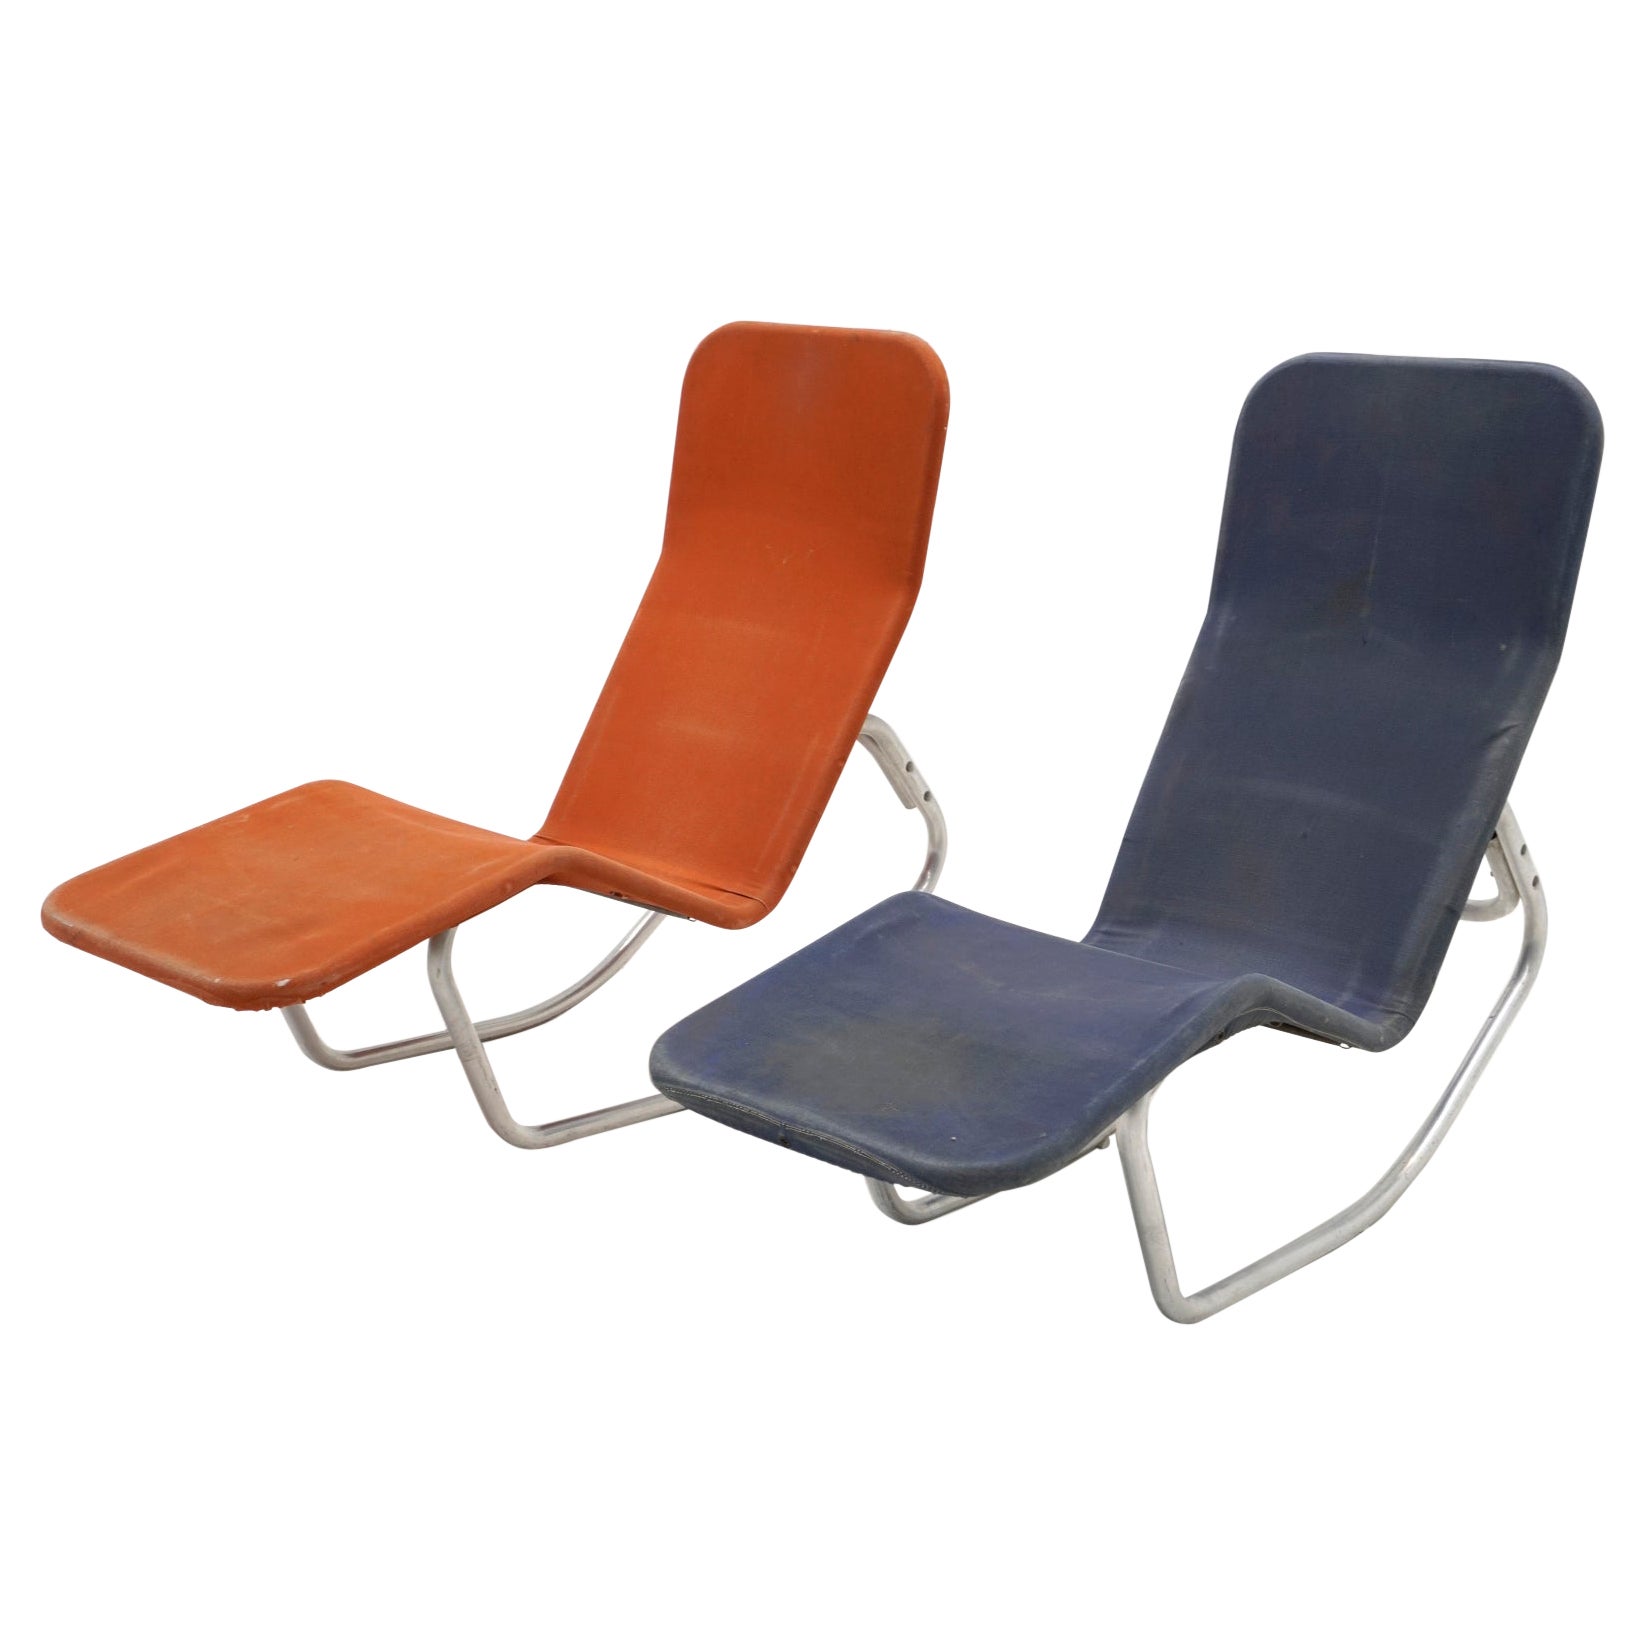 Pair Barwa Reclining Lounge Chairs in Blue and Orange, Outdoor or Indoor, Signed